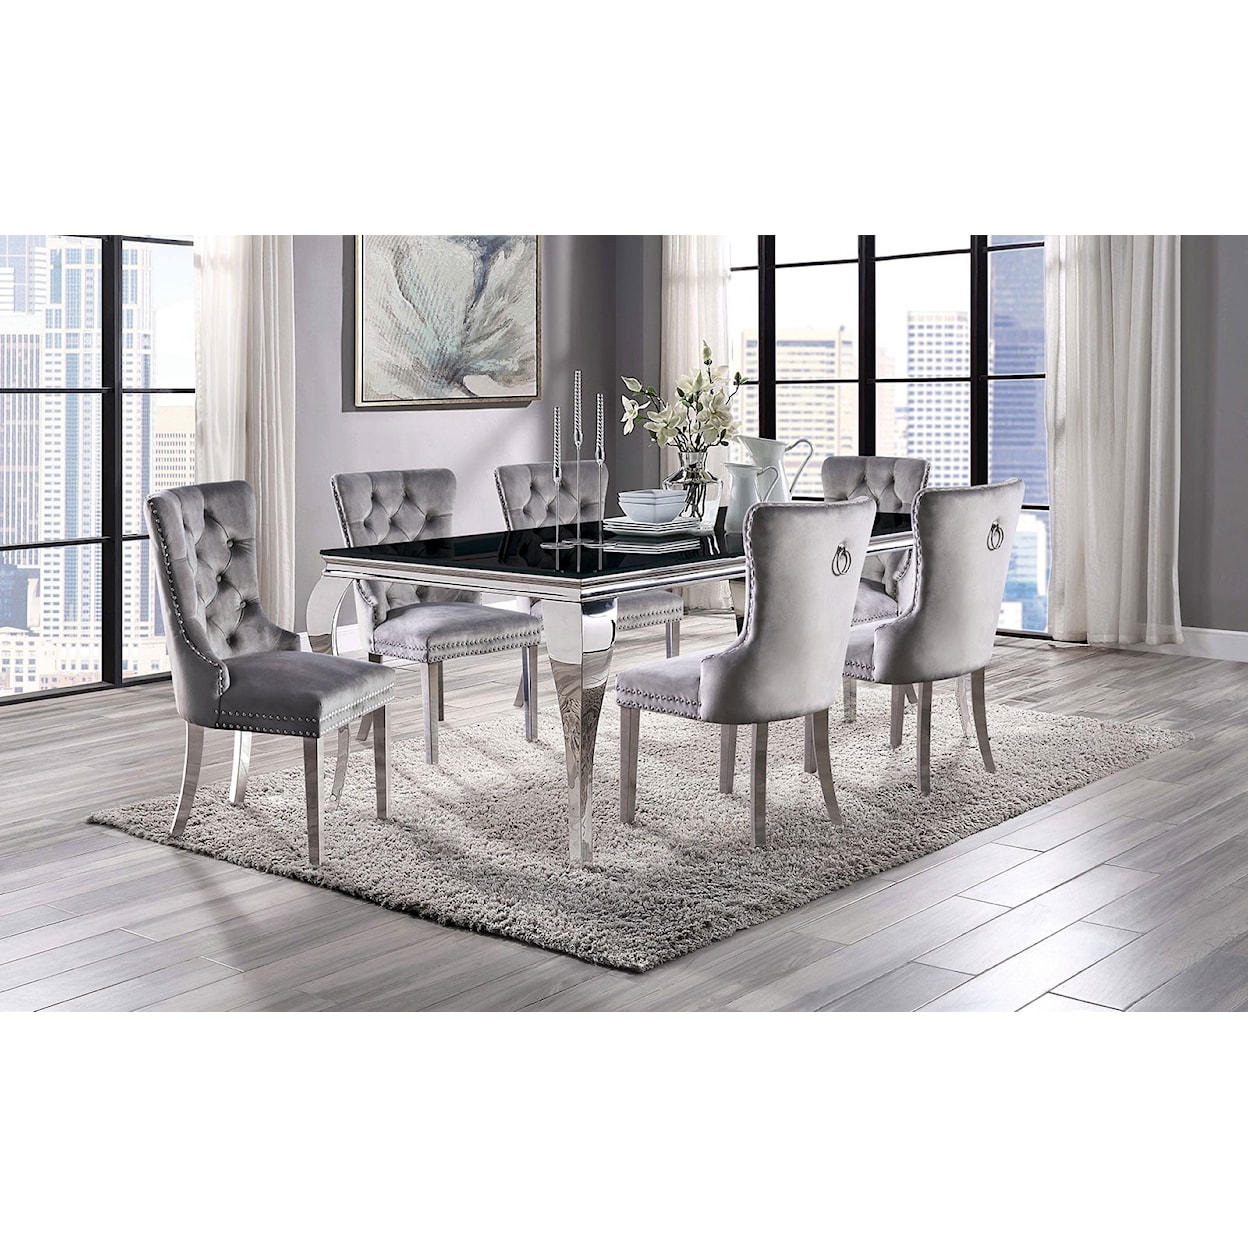 Furniture of America Neuveville Dining Table